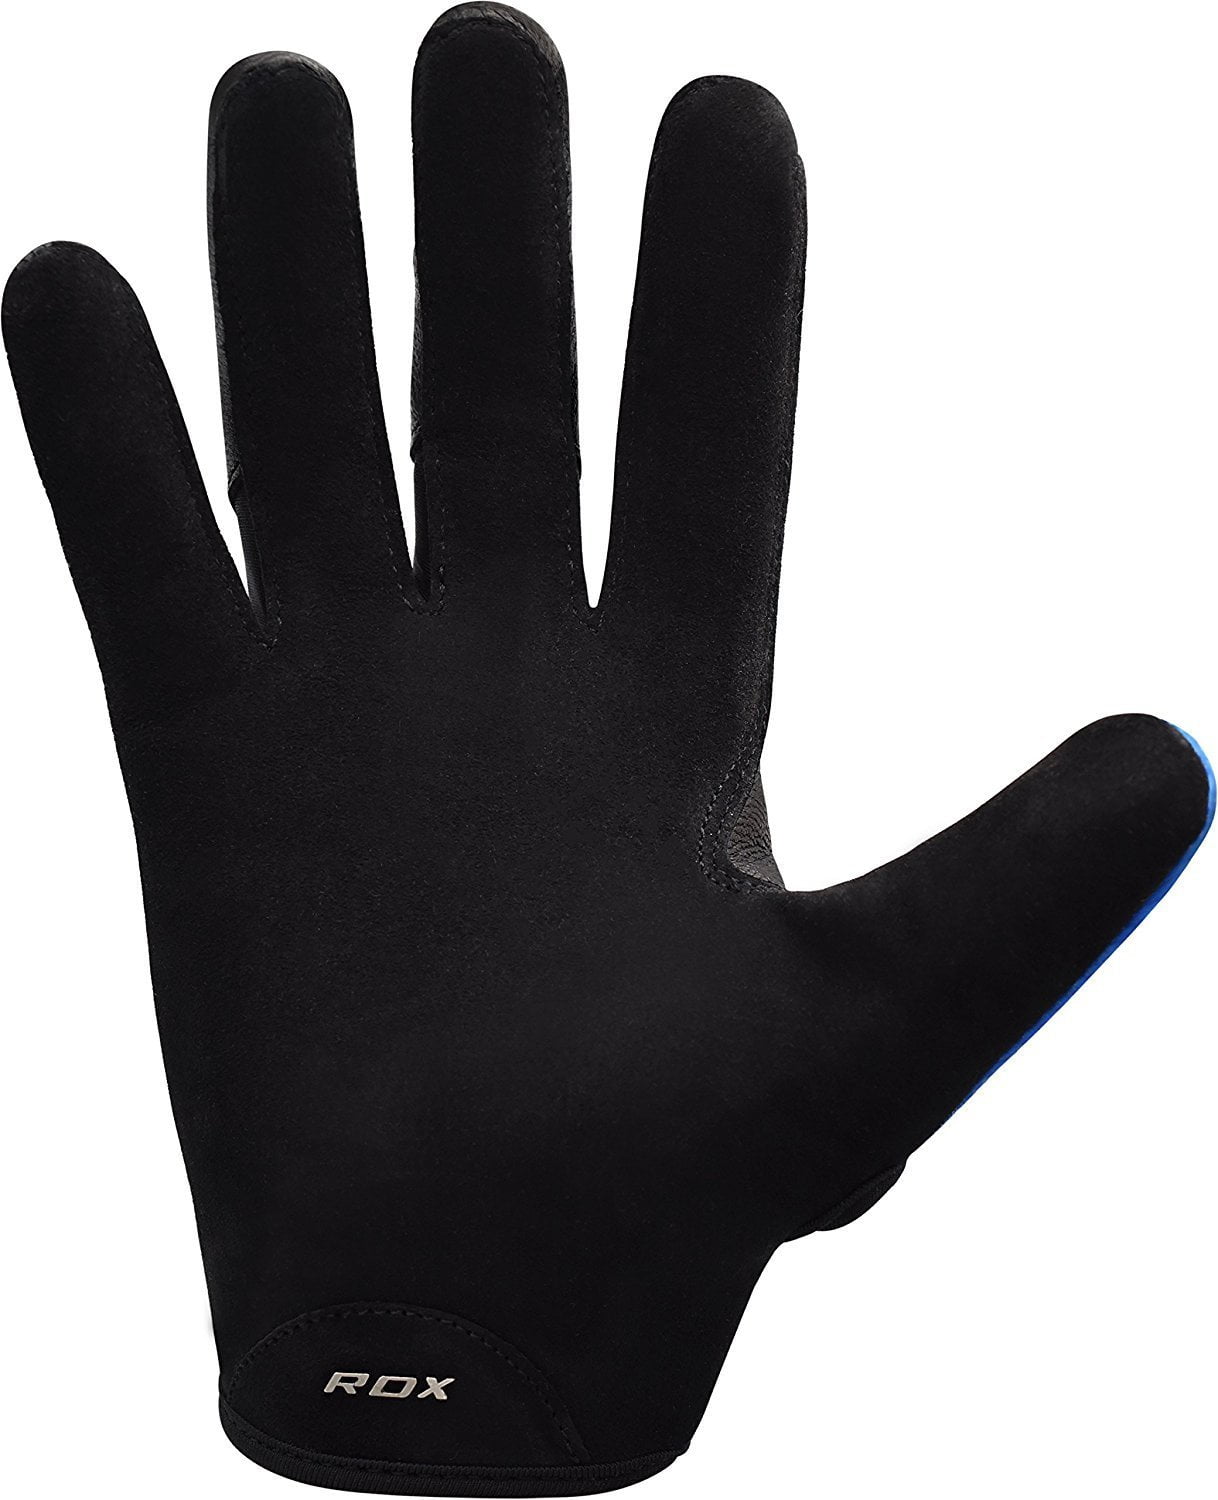 Gxmmat Non-Slip Breathable Workout Gloves for Gym